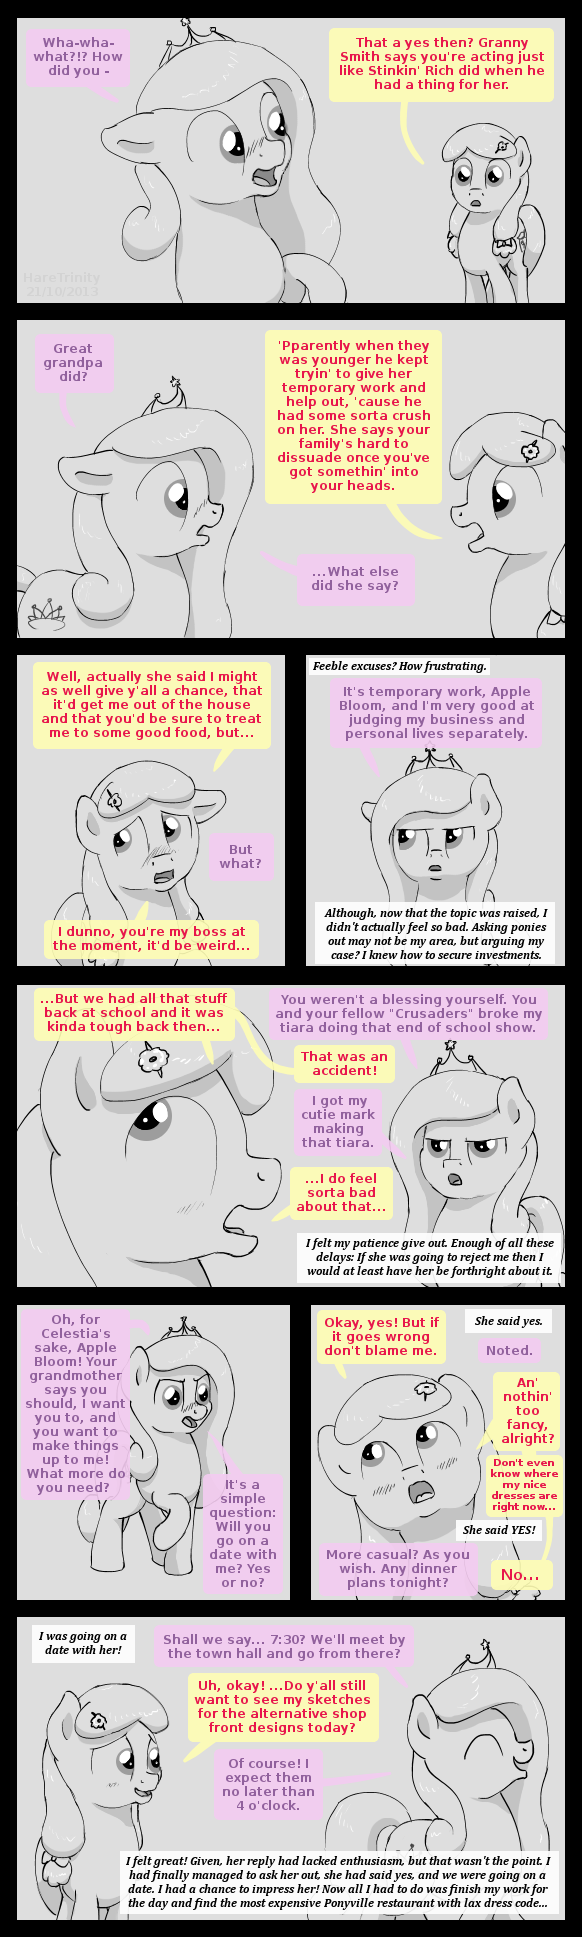 Page 23 - Diamond Tiara is confronted by Apple Bloom